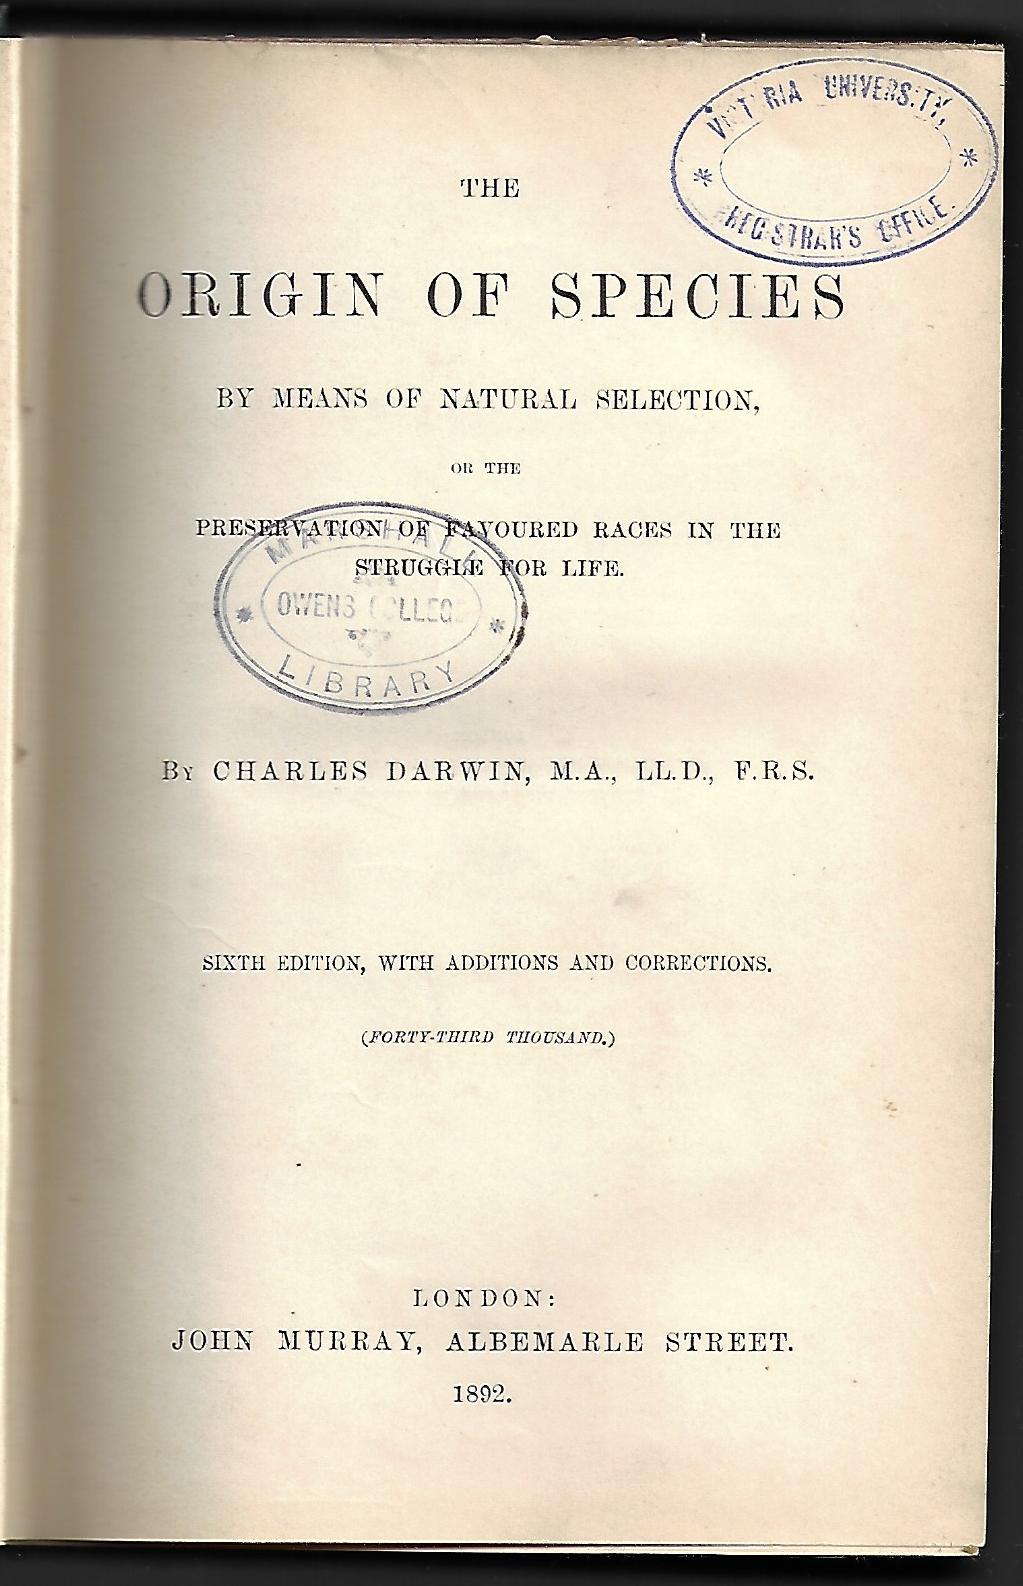 the origin of species by means of natural selection